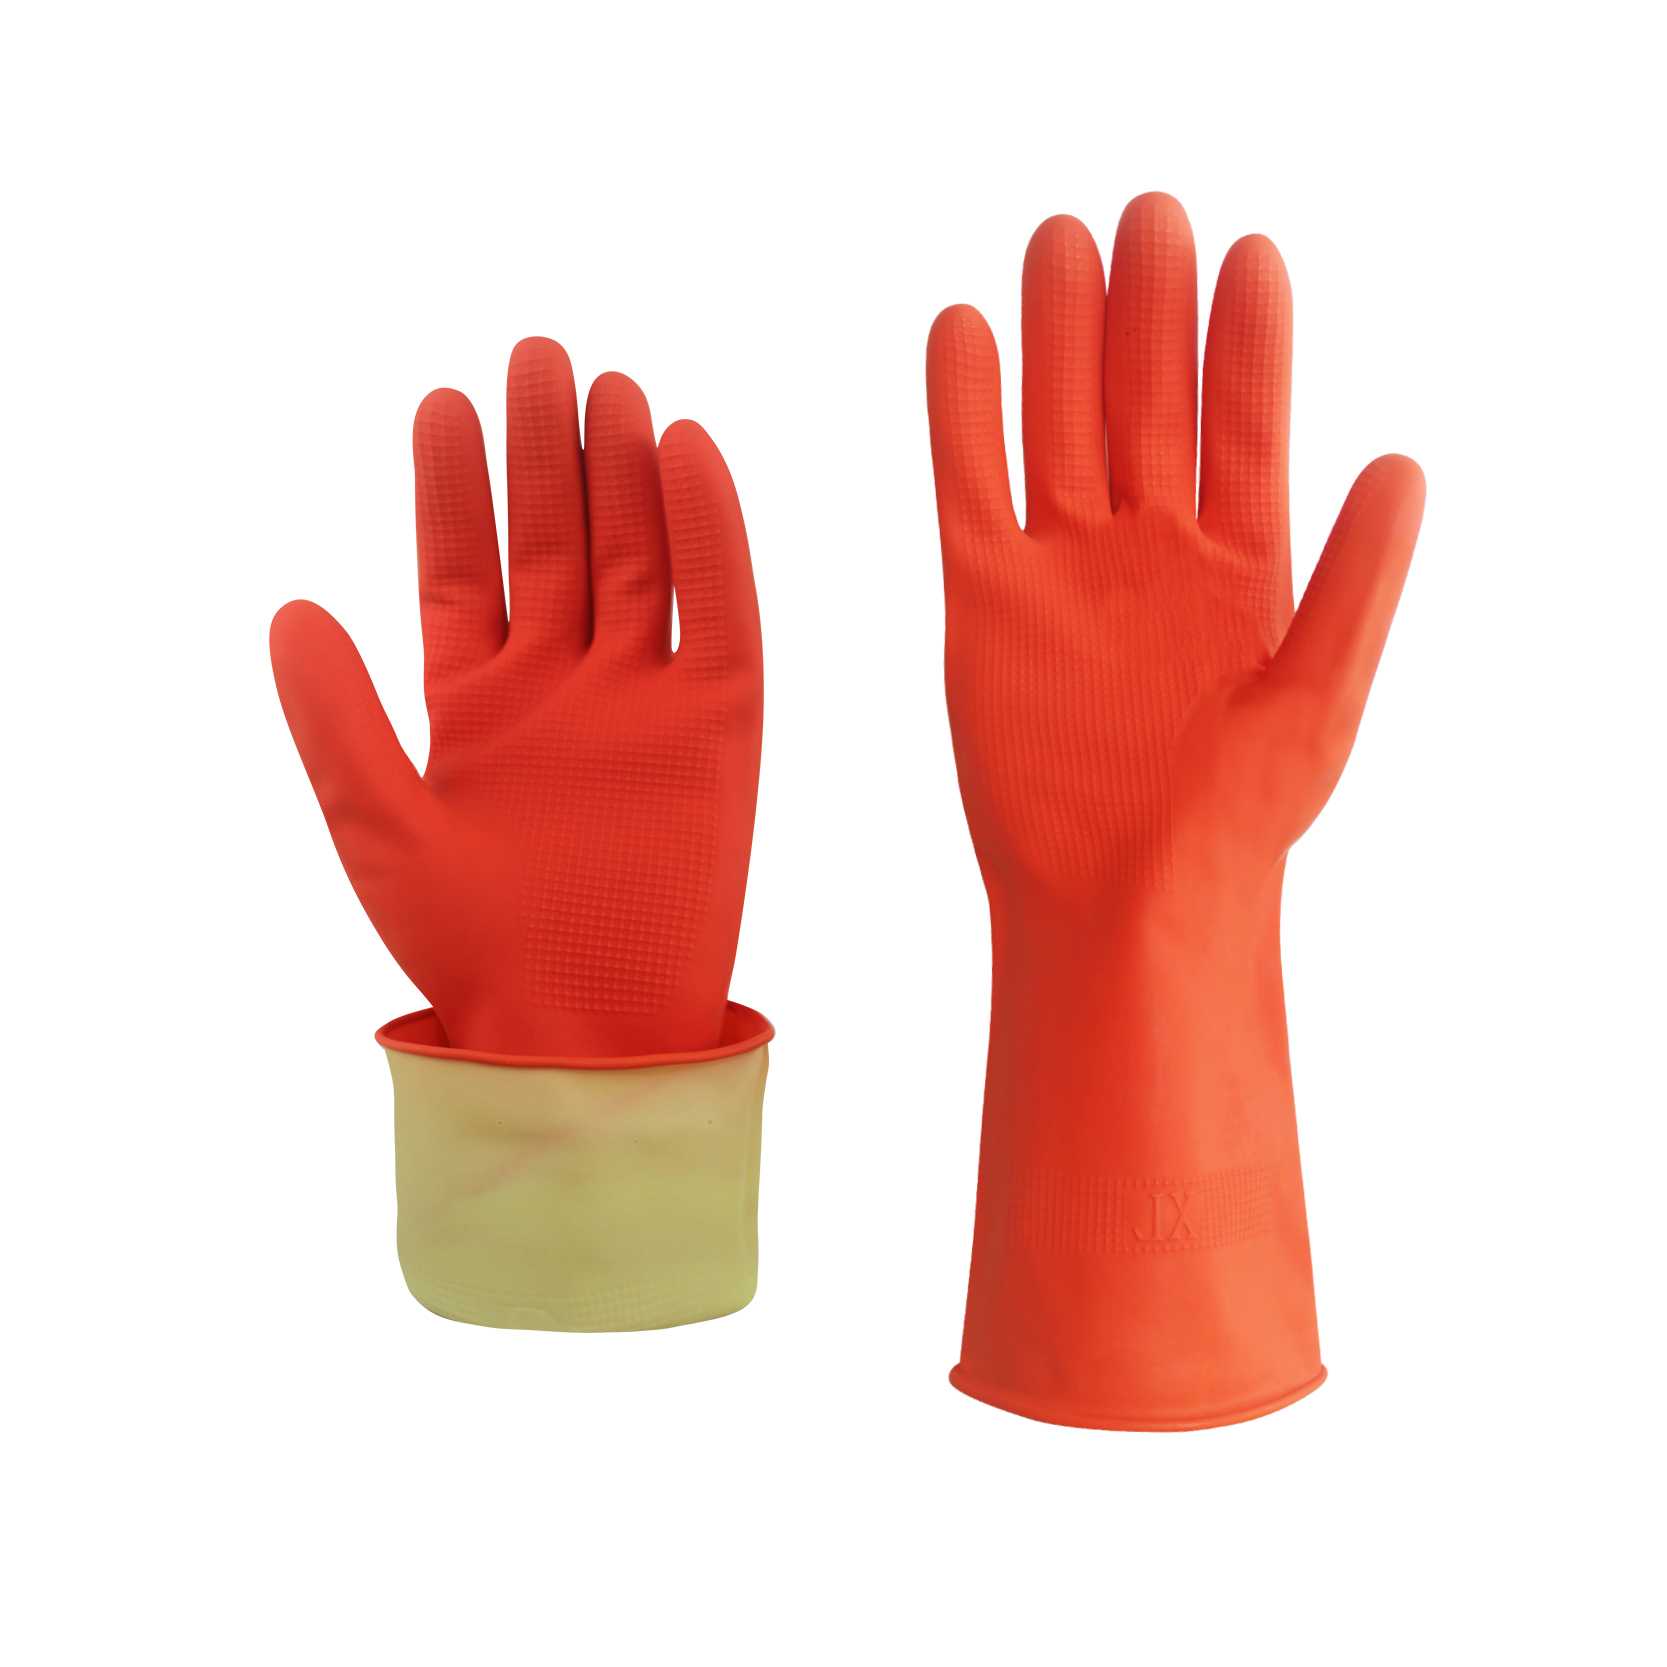 Household Cleaning Latex Gloves Kitchen Dishwashing Household Gloves (2)